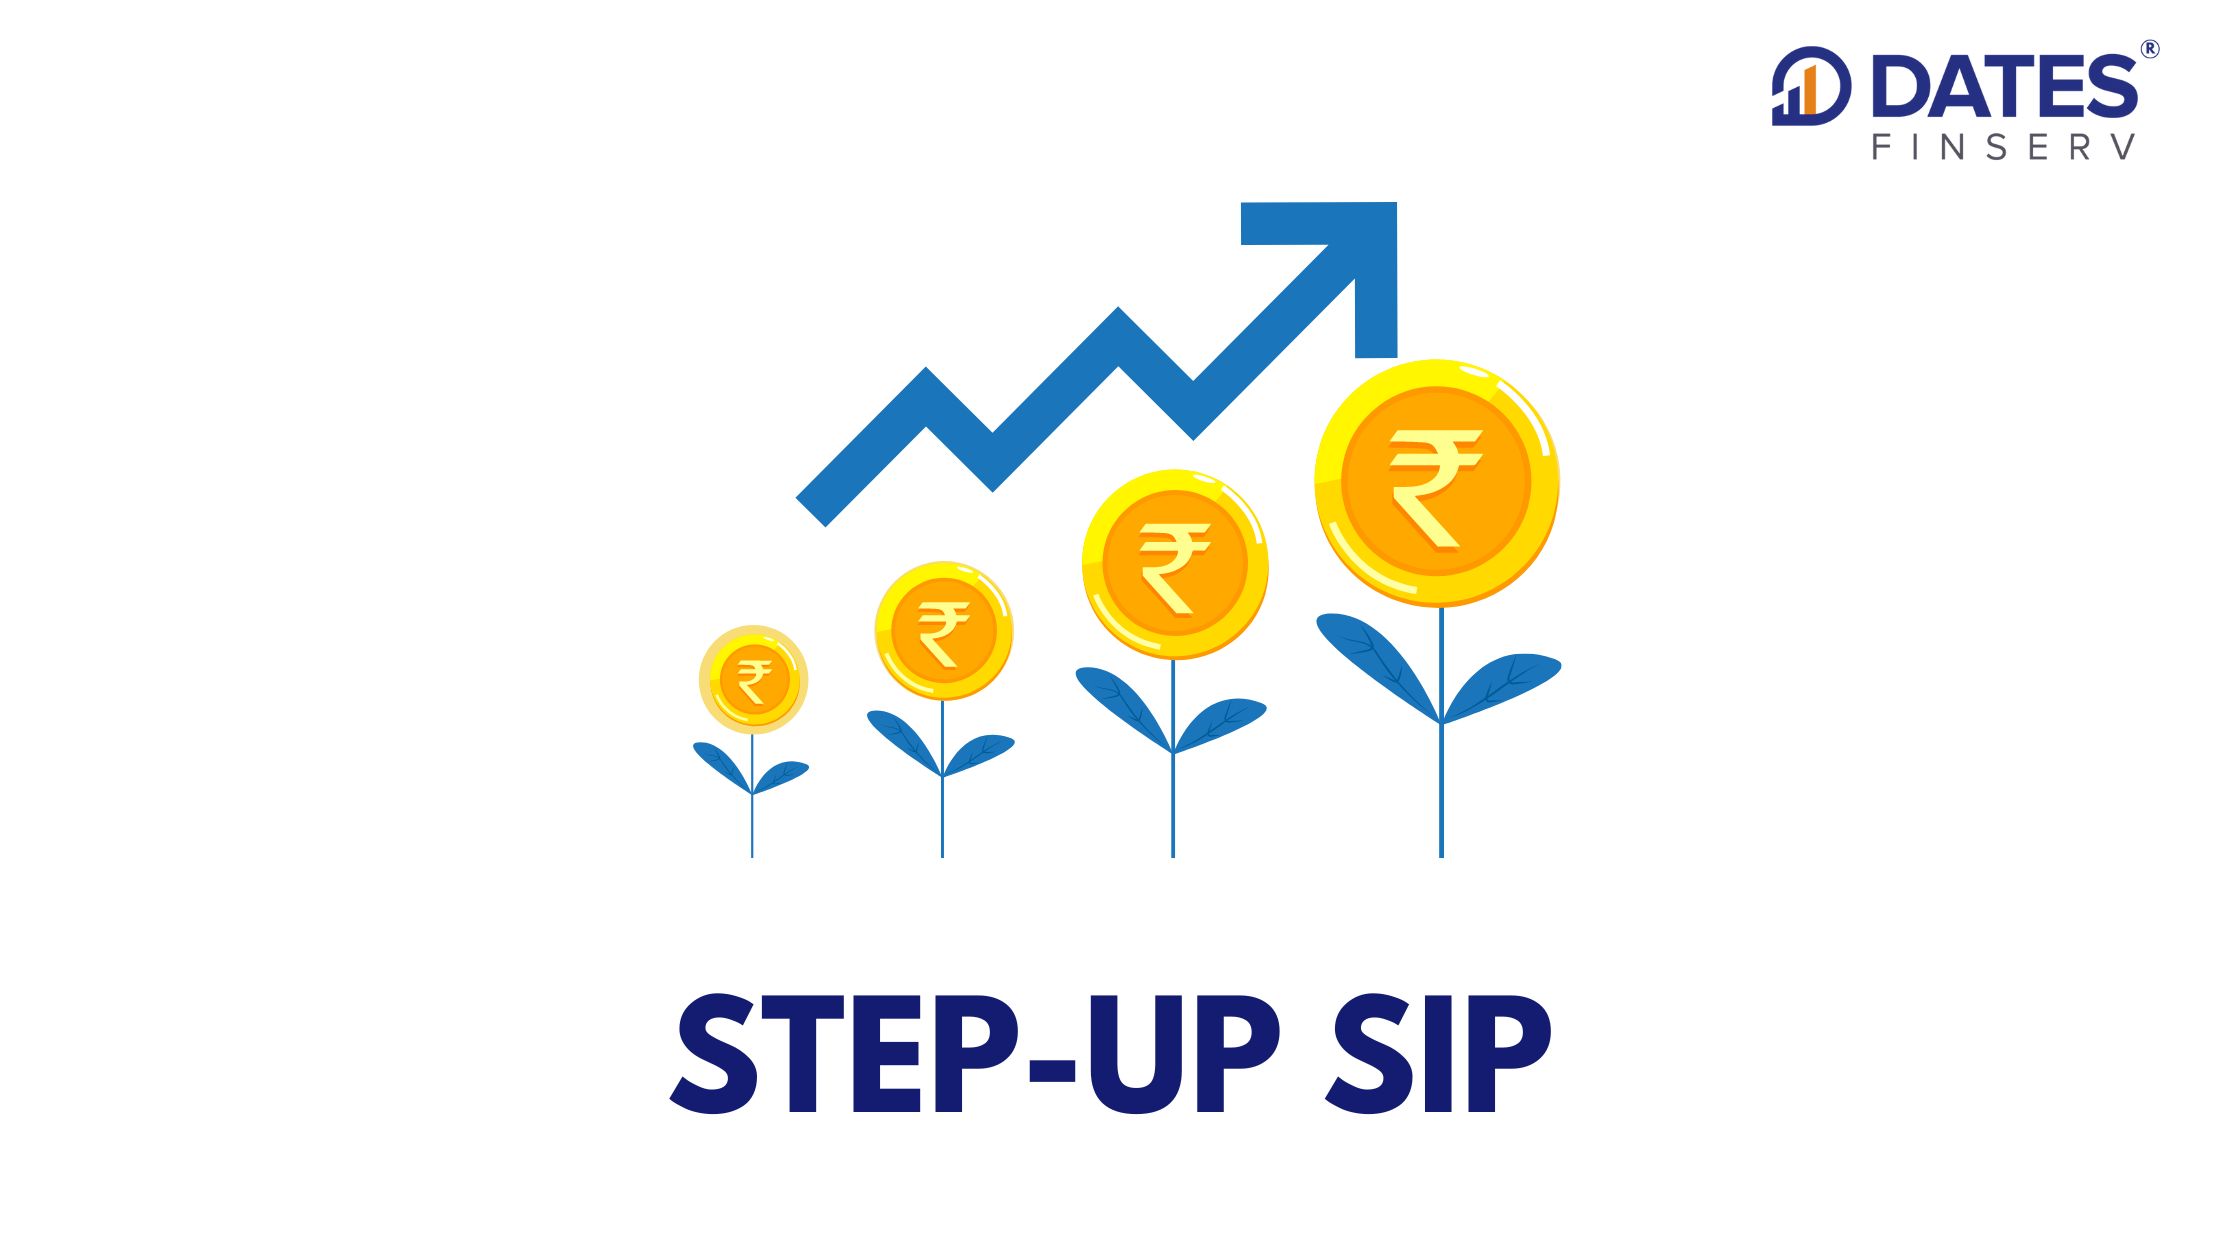 What is Step up SIP?